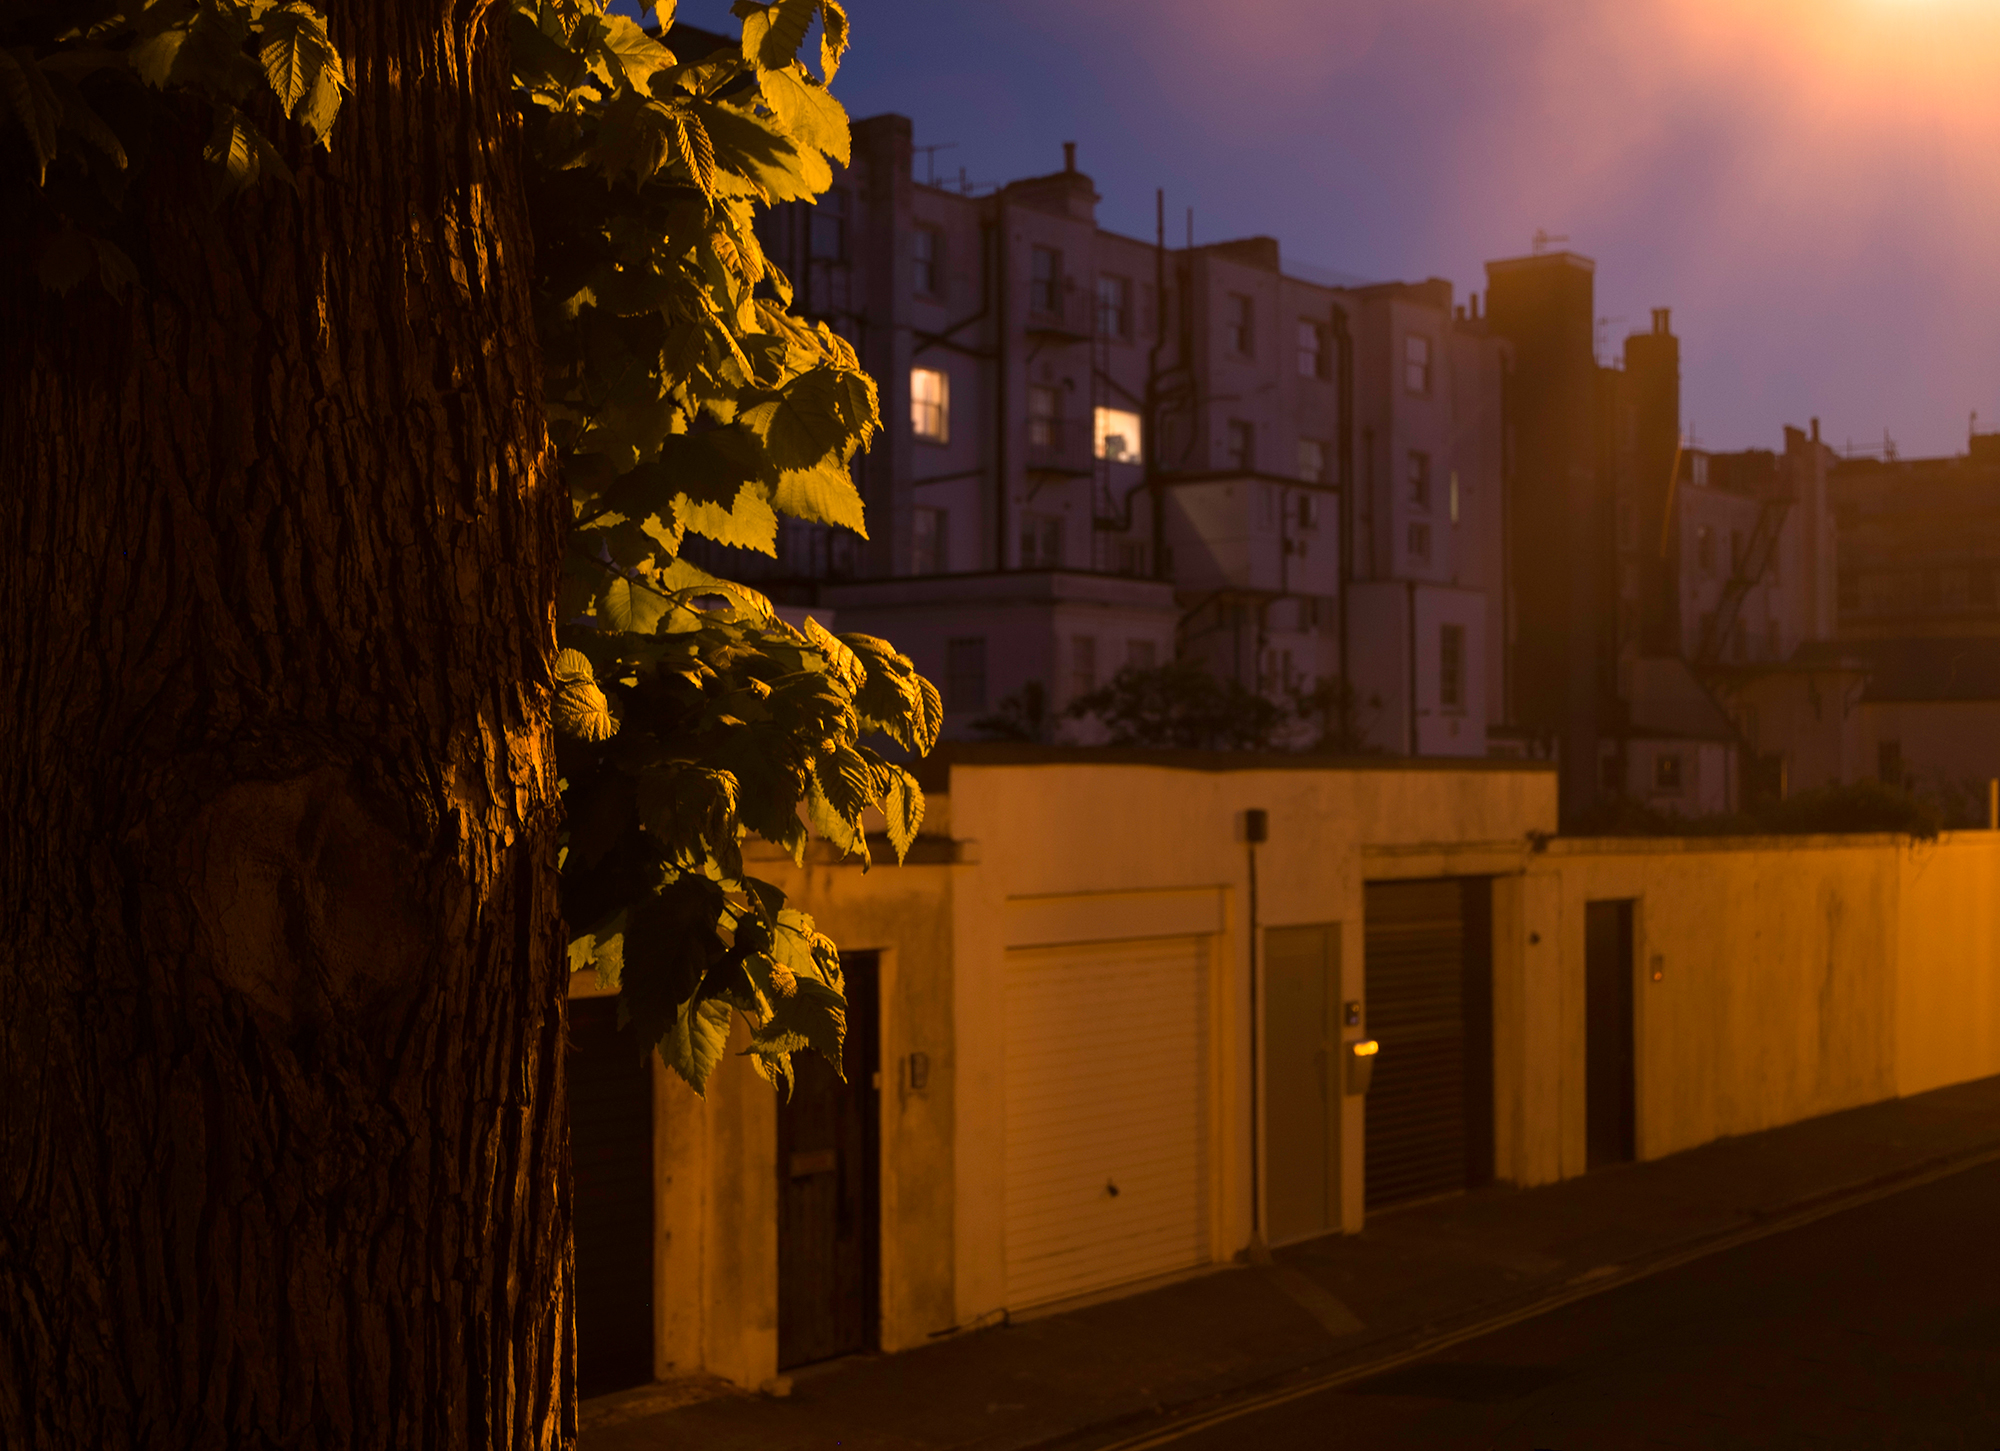 A tree with leaves glowing in the streetlight against a background of garages and the backs of buildings